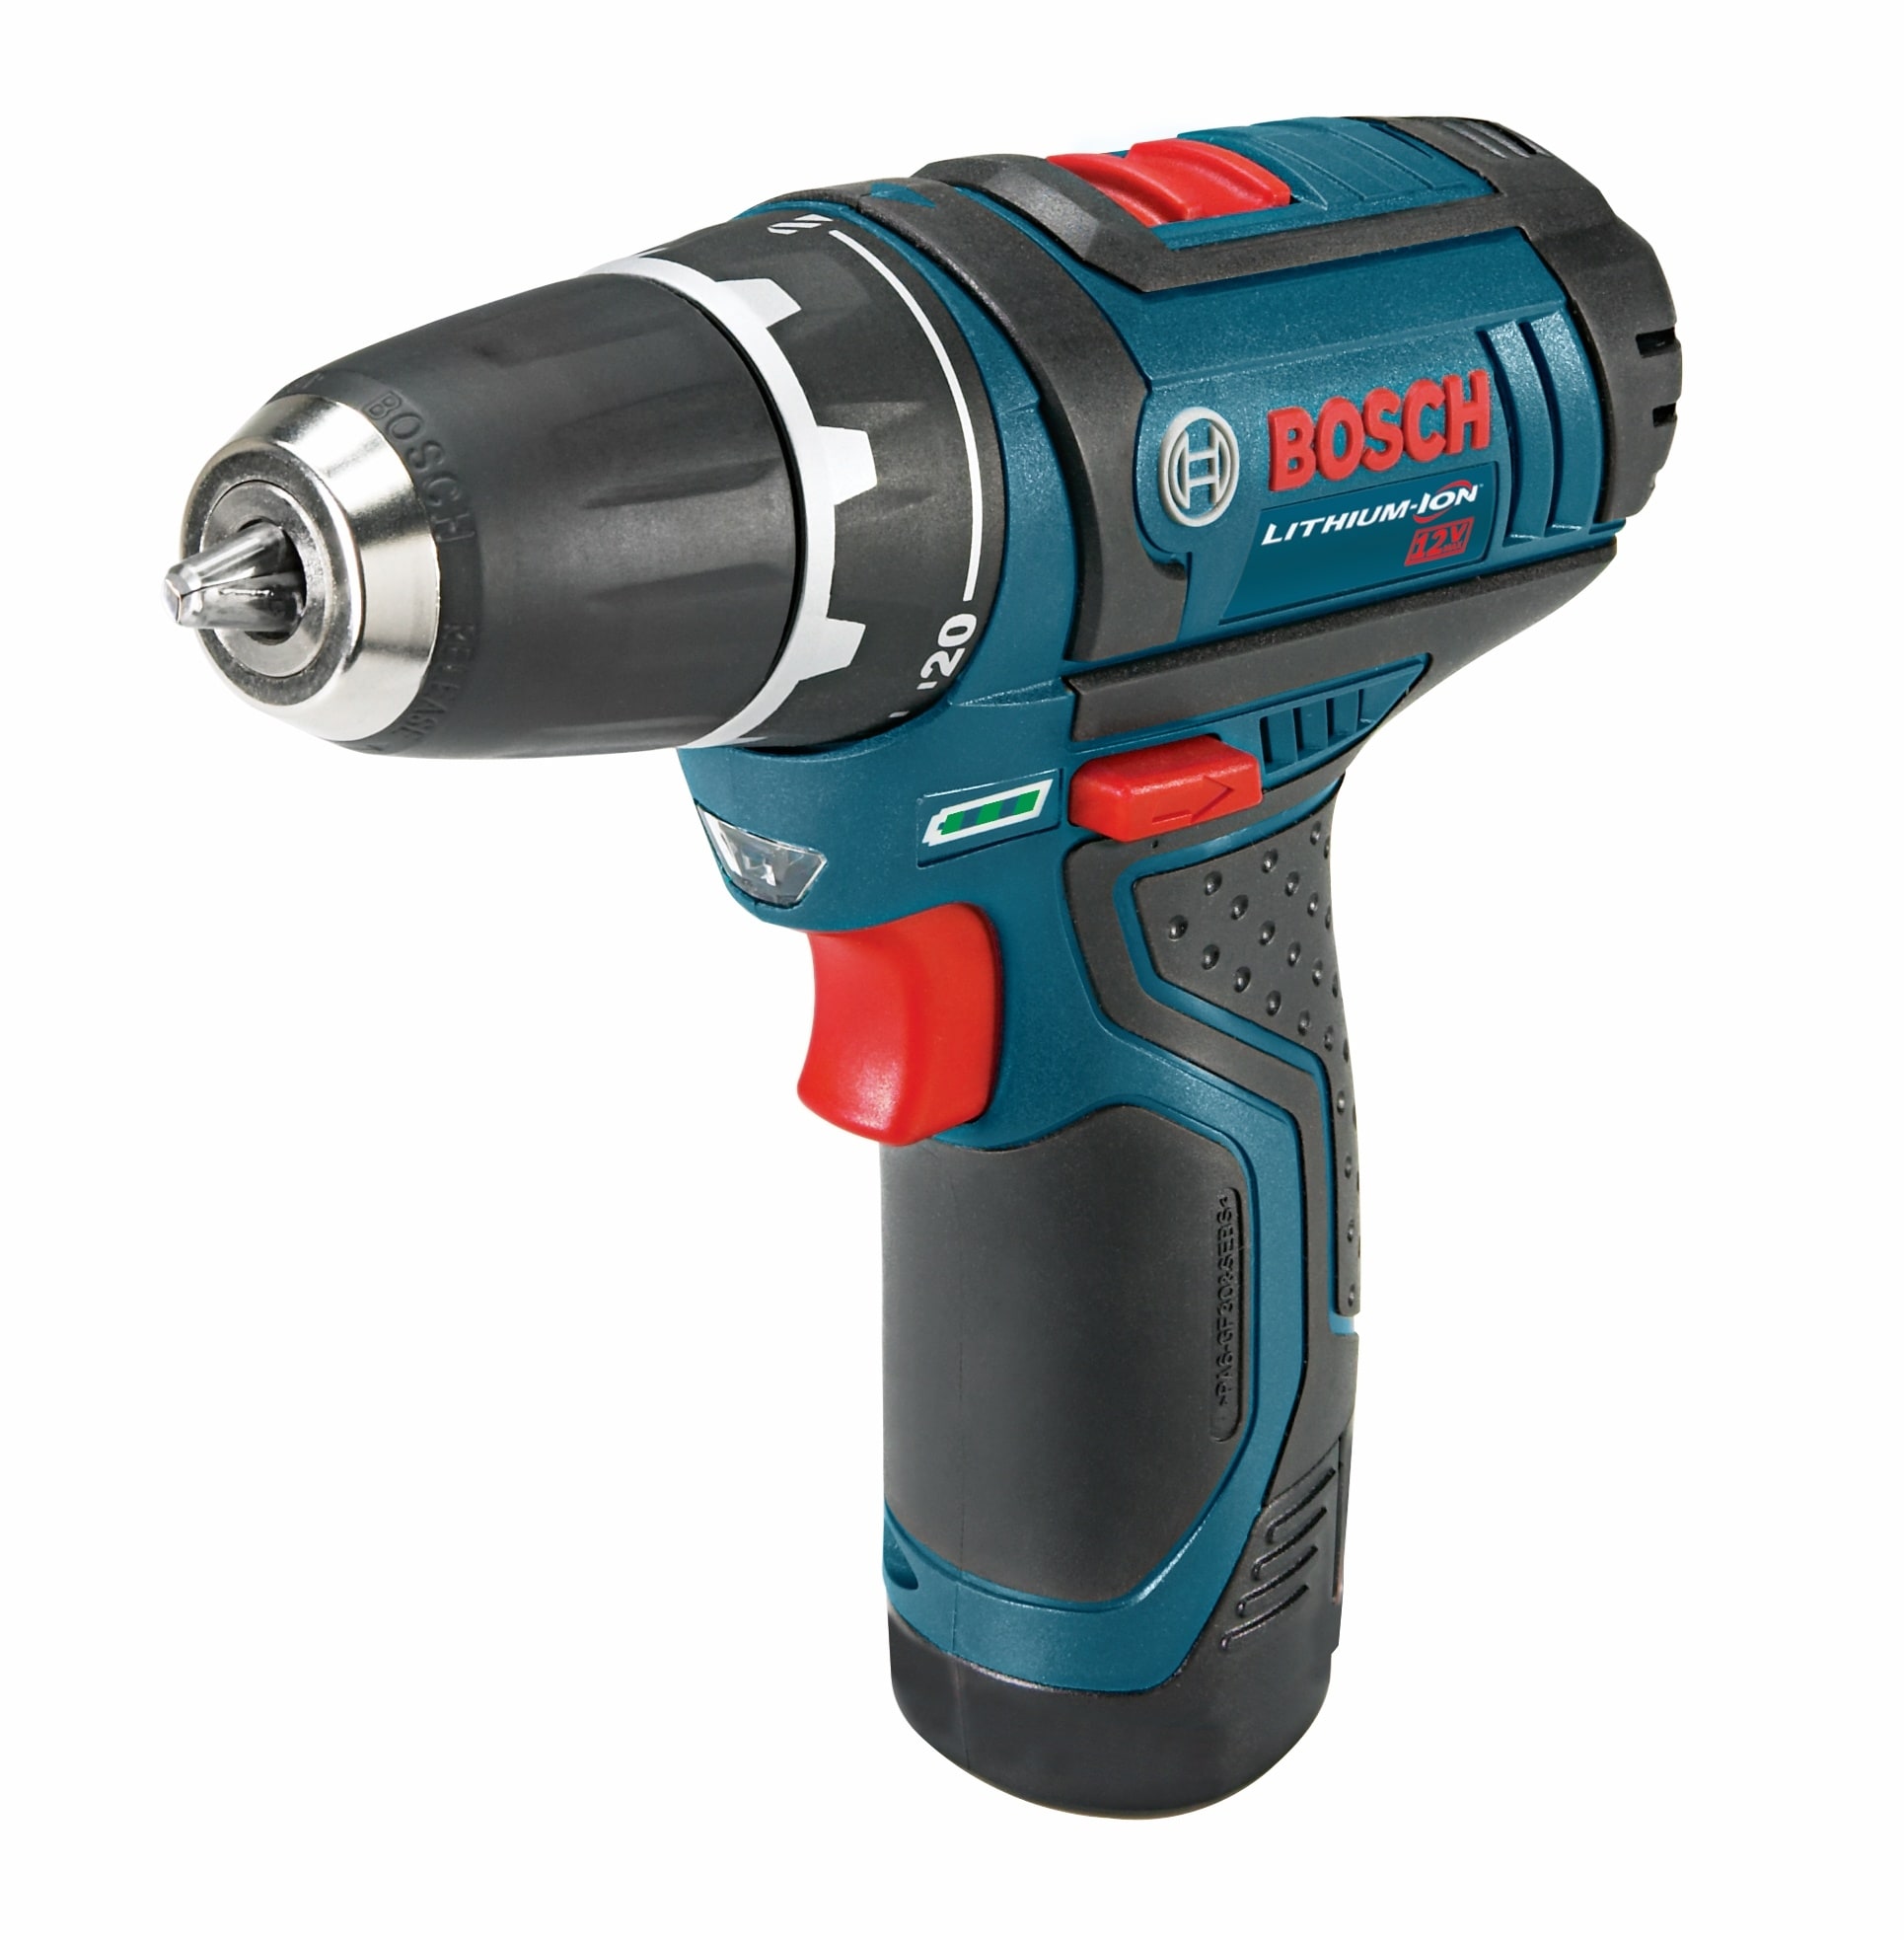 Why Bosch's 12V Brushless Drill and Driver are PERFECT